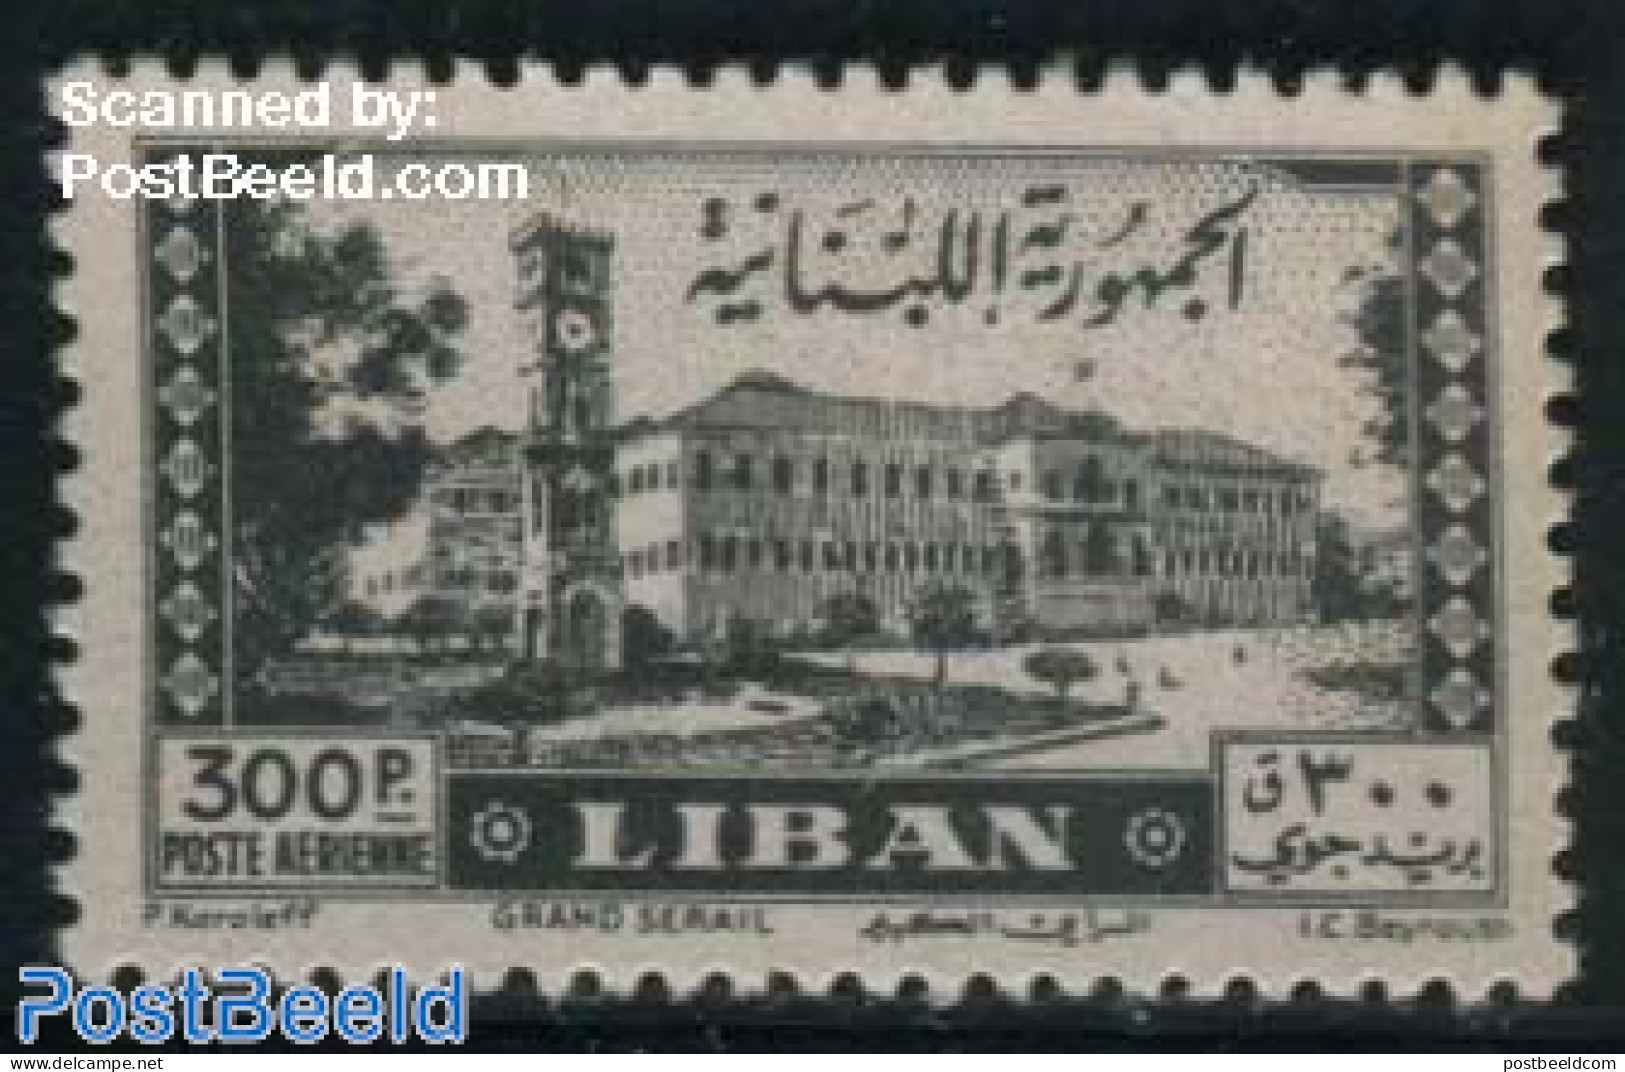 Lebanon 1947 300P, Stamp Out Of Set, Mint NH - Liban